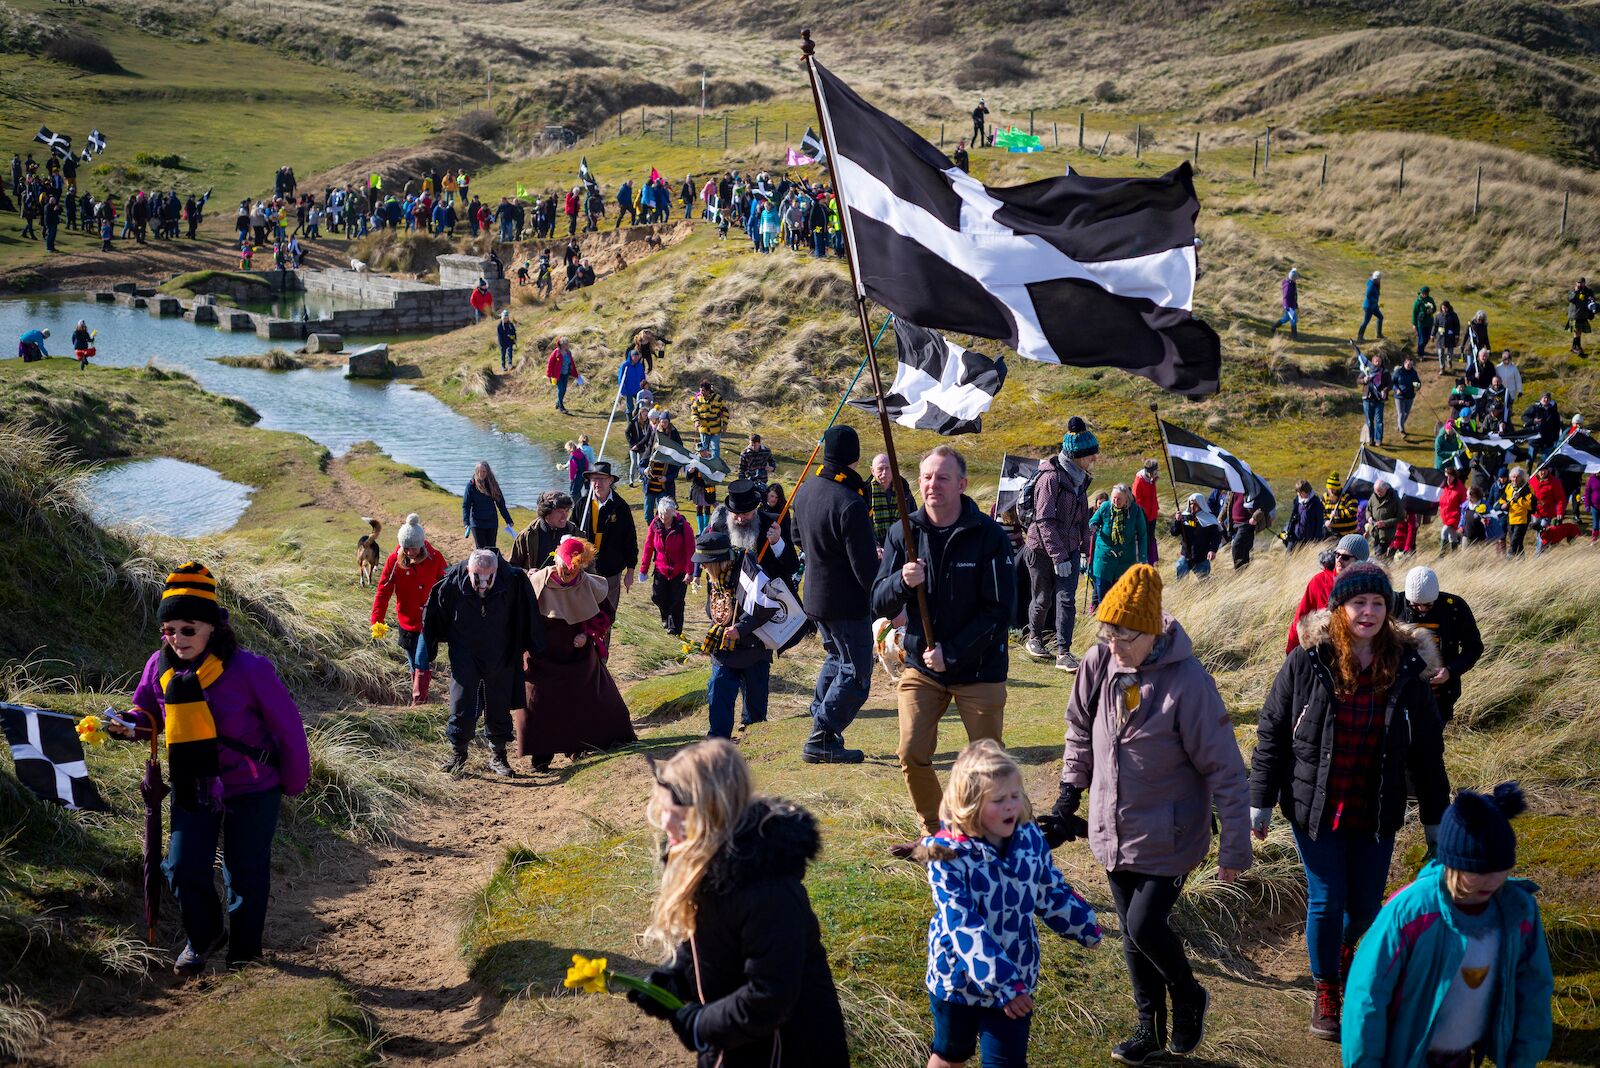 Celtic flags: Cornwall. Cornwall's flag is black and white with a cross